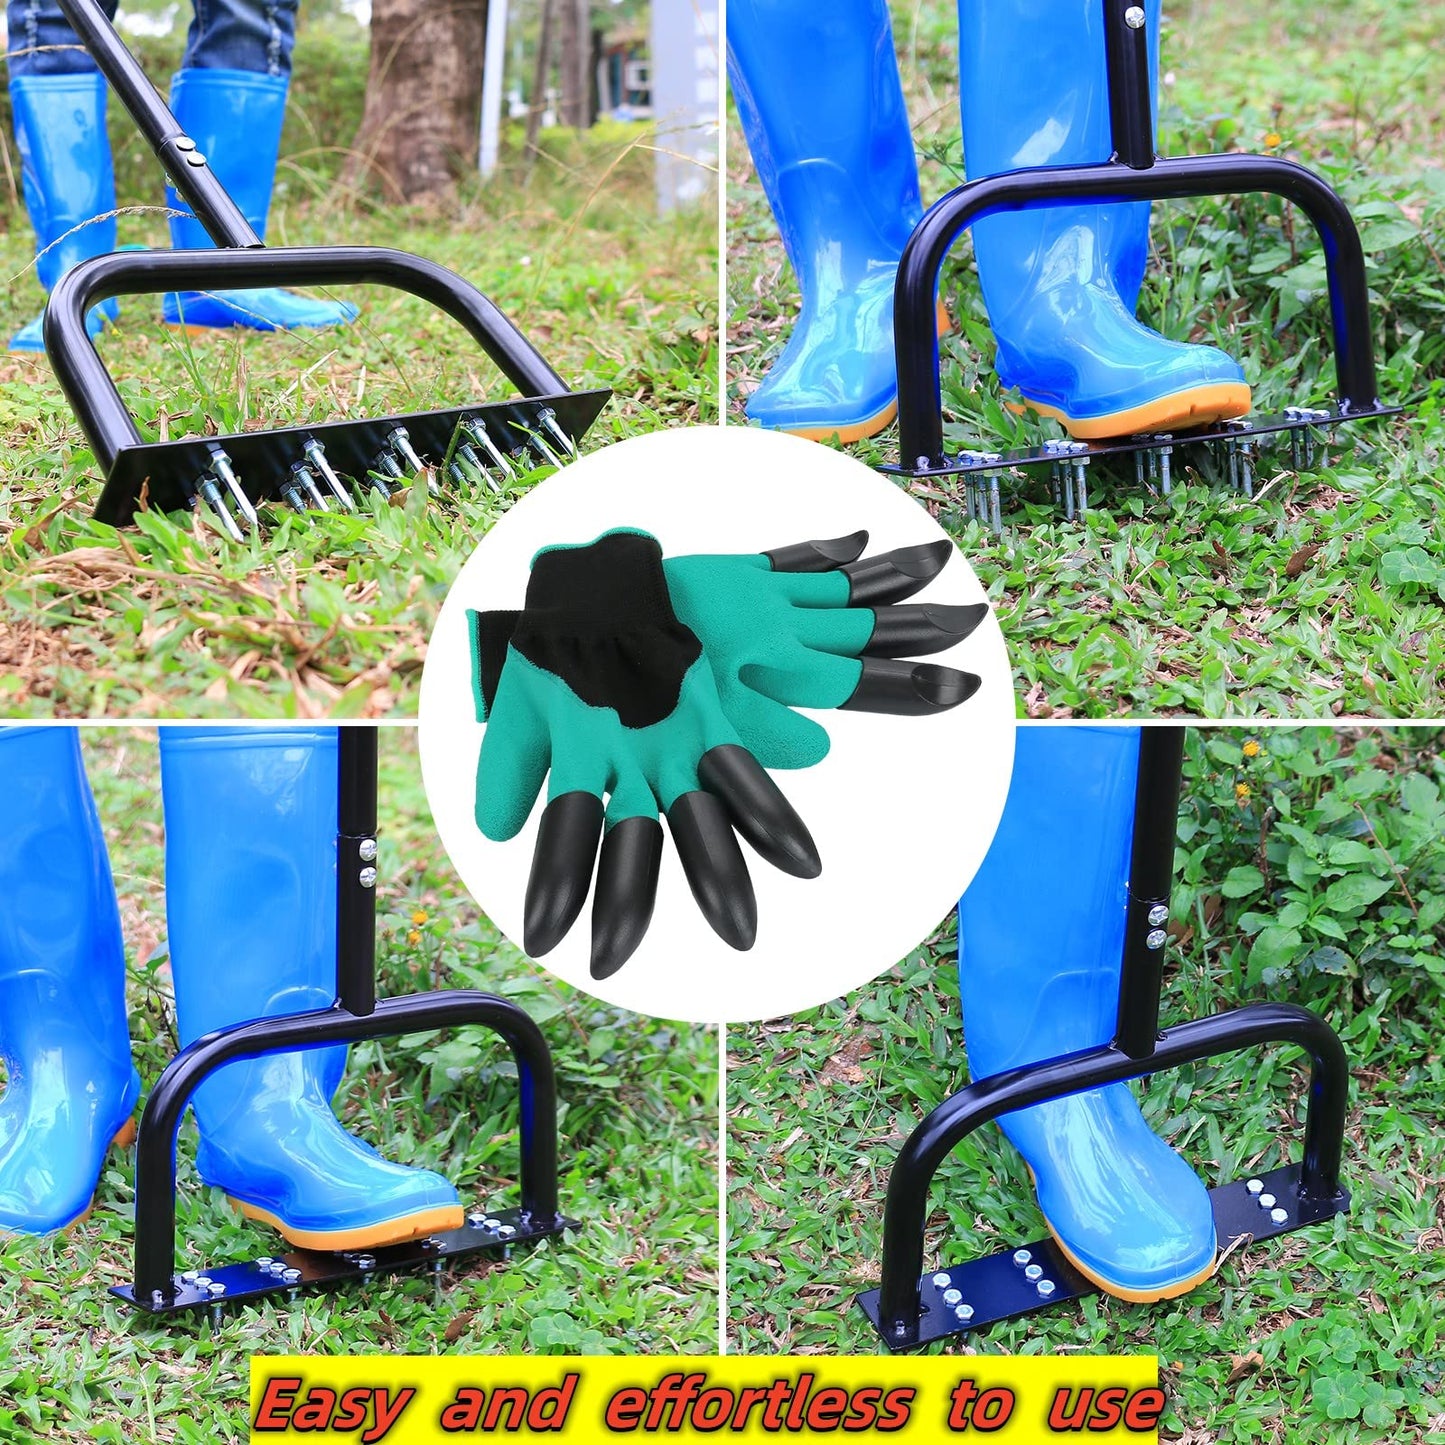 Lawn Aerator Tool Manual Metal Spike Grass Aeration With Dethatching Rake 15 Iron Spikes For Yard And Garden Compacted Soil Aerator Tool Black